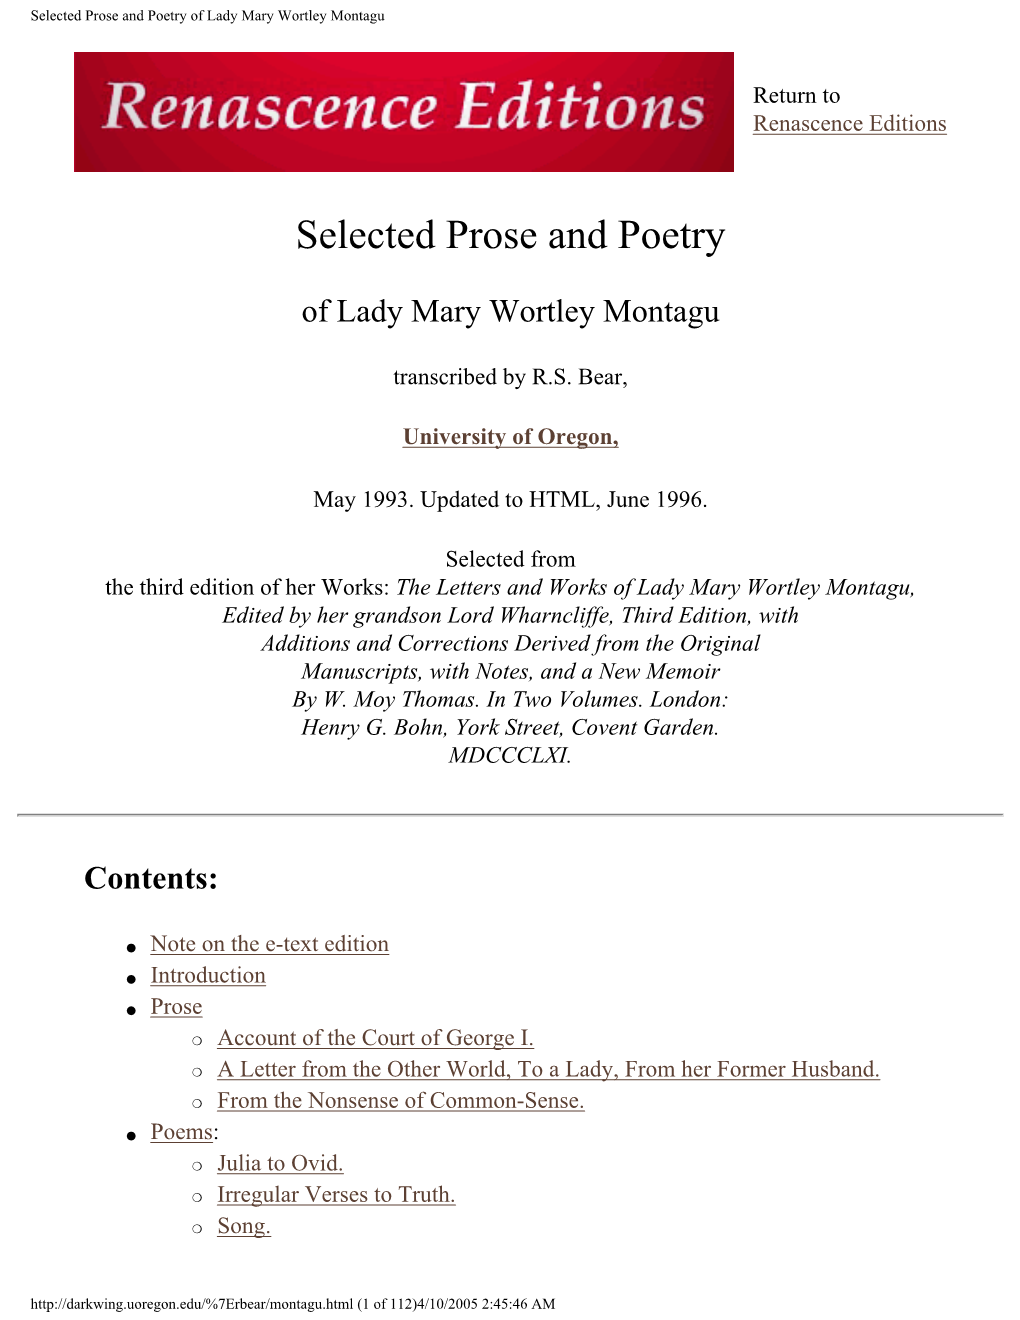 Selected Prose and Poetry of Lady Mary Wortley Montagu